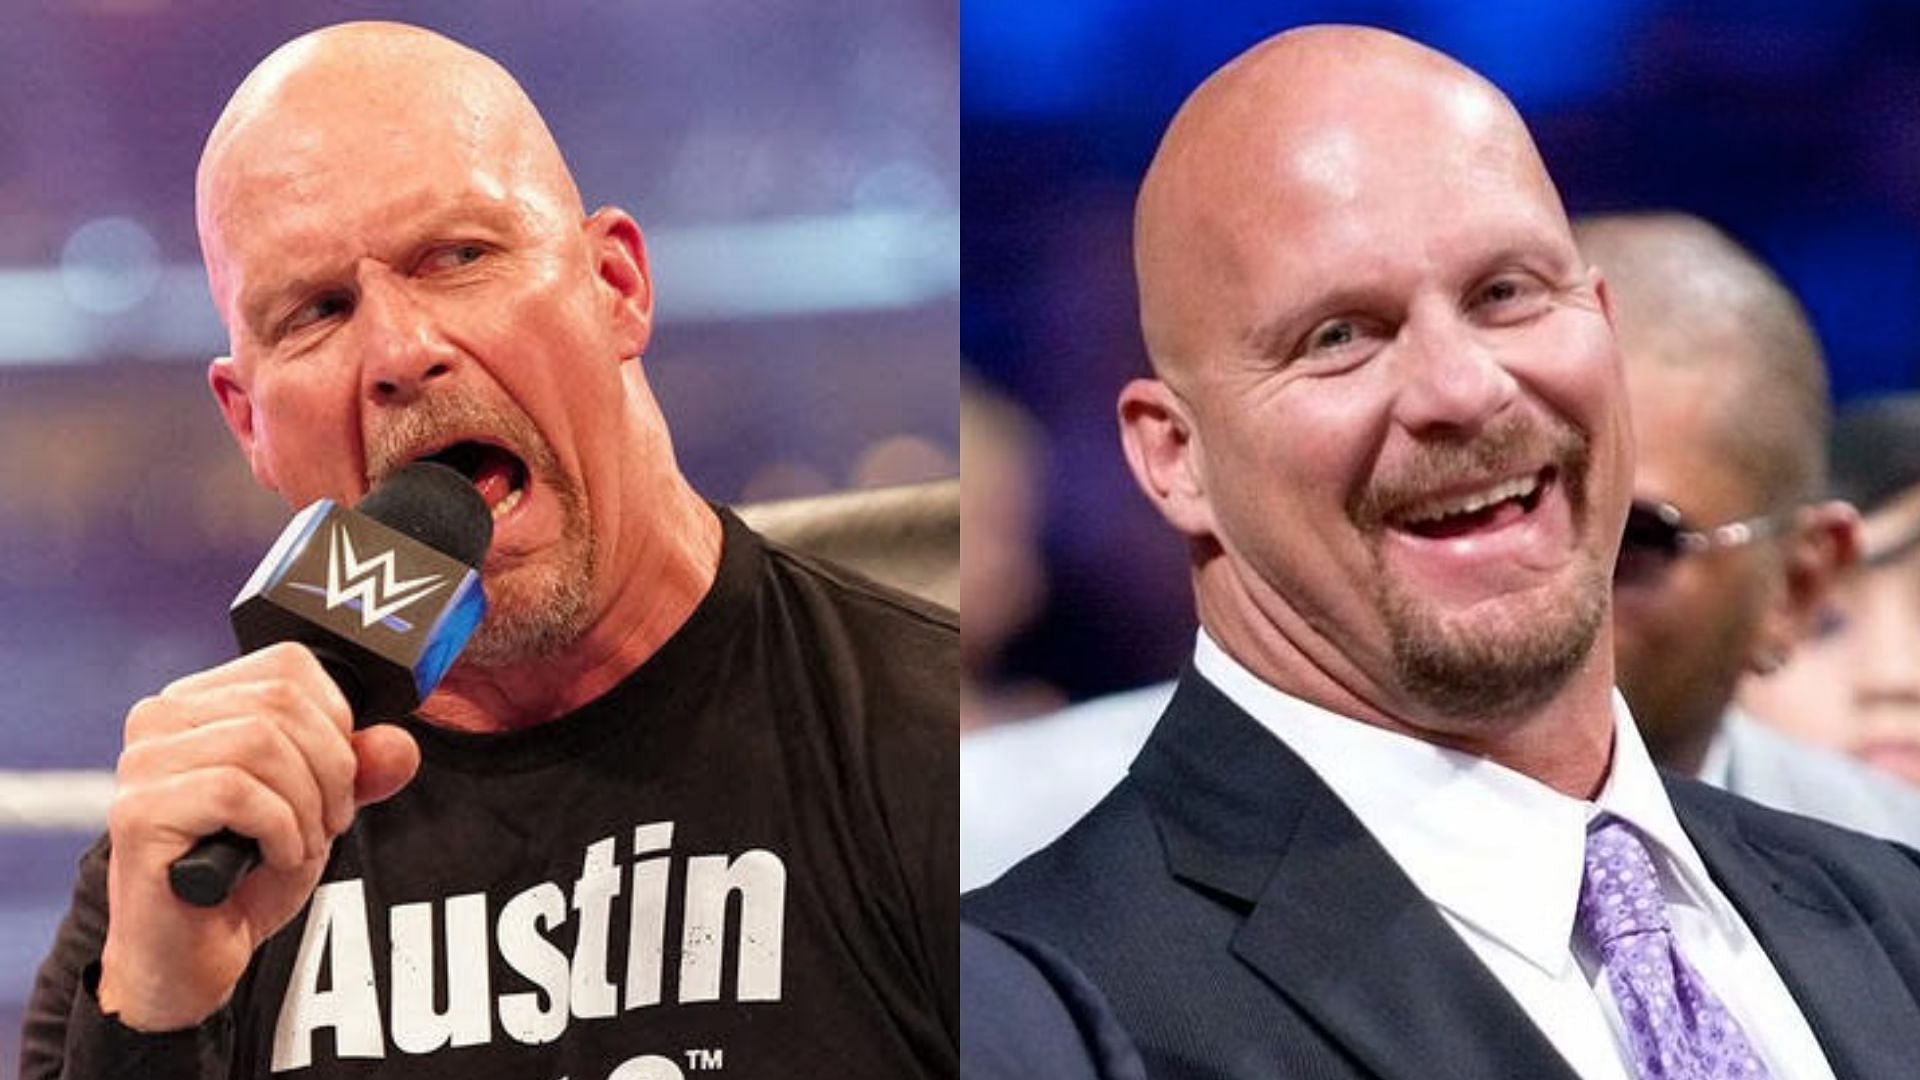 Stone Cold Steve Austin defeated Kevin Owens at WrestleMania 38. 